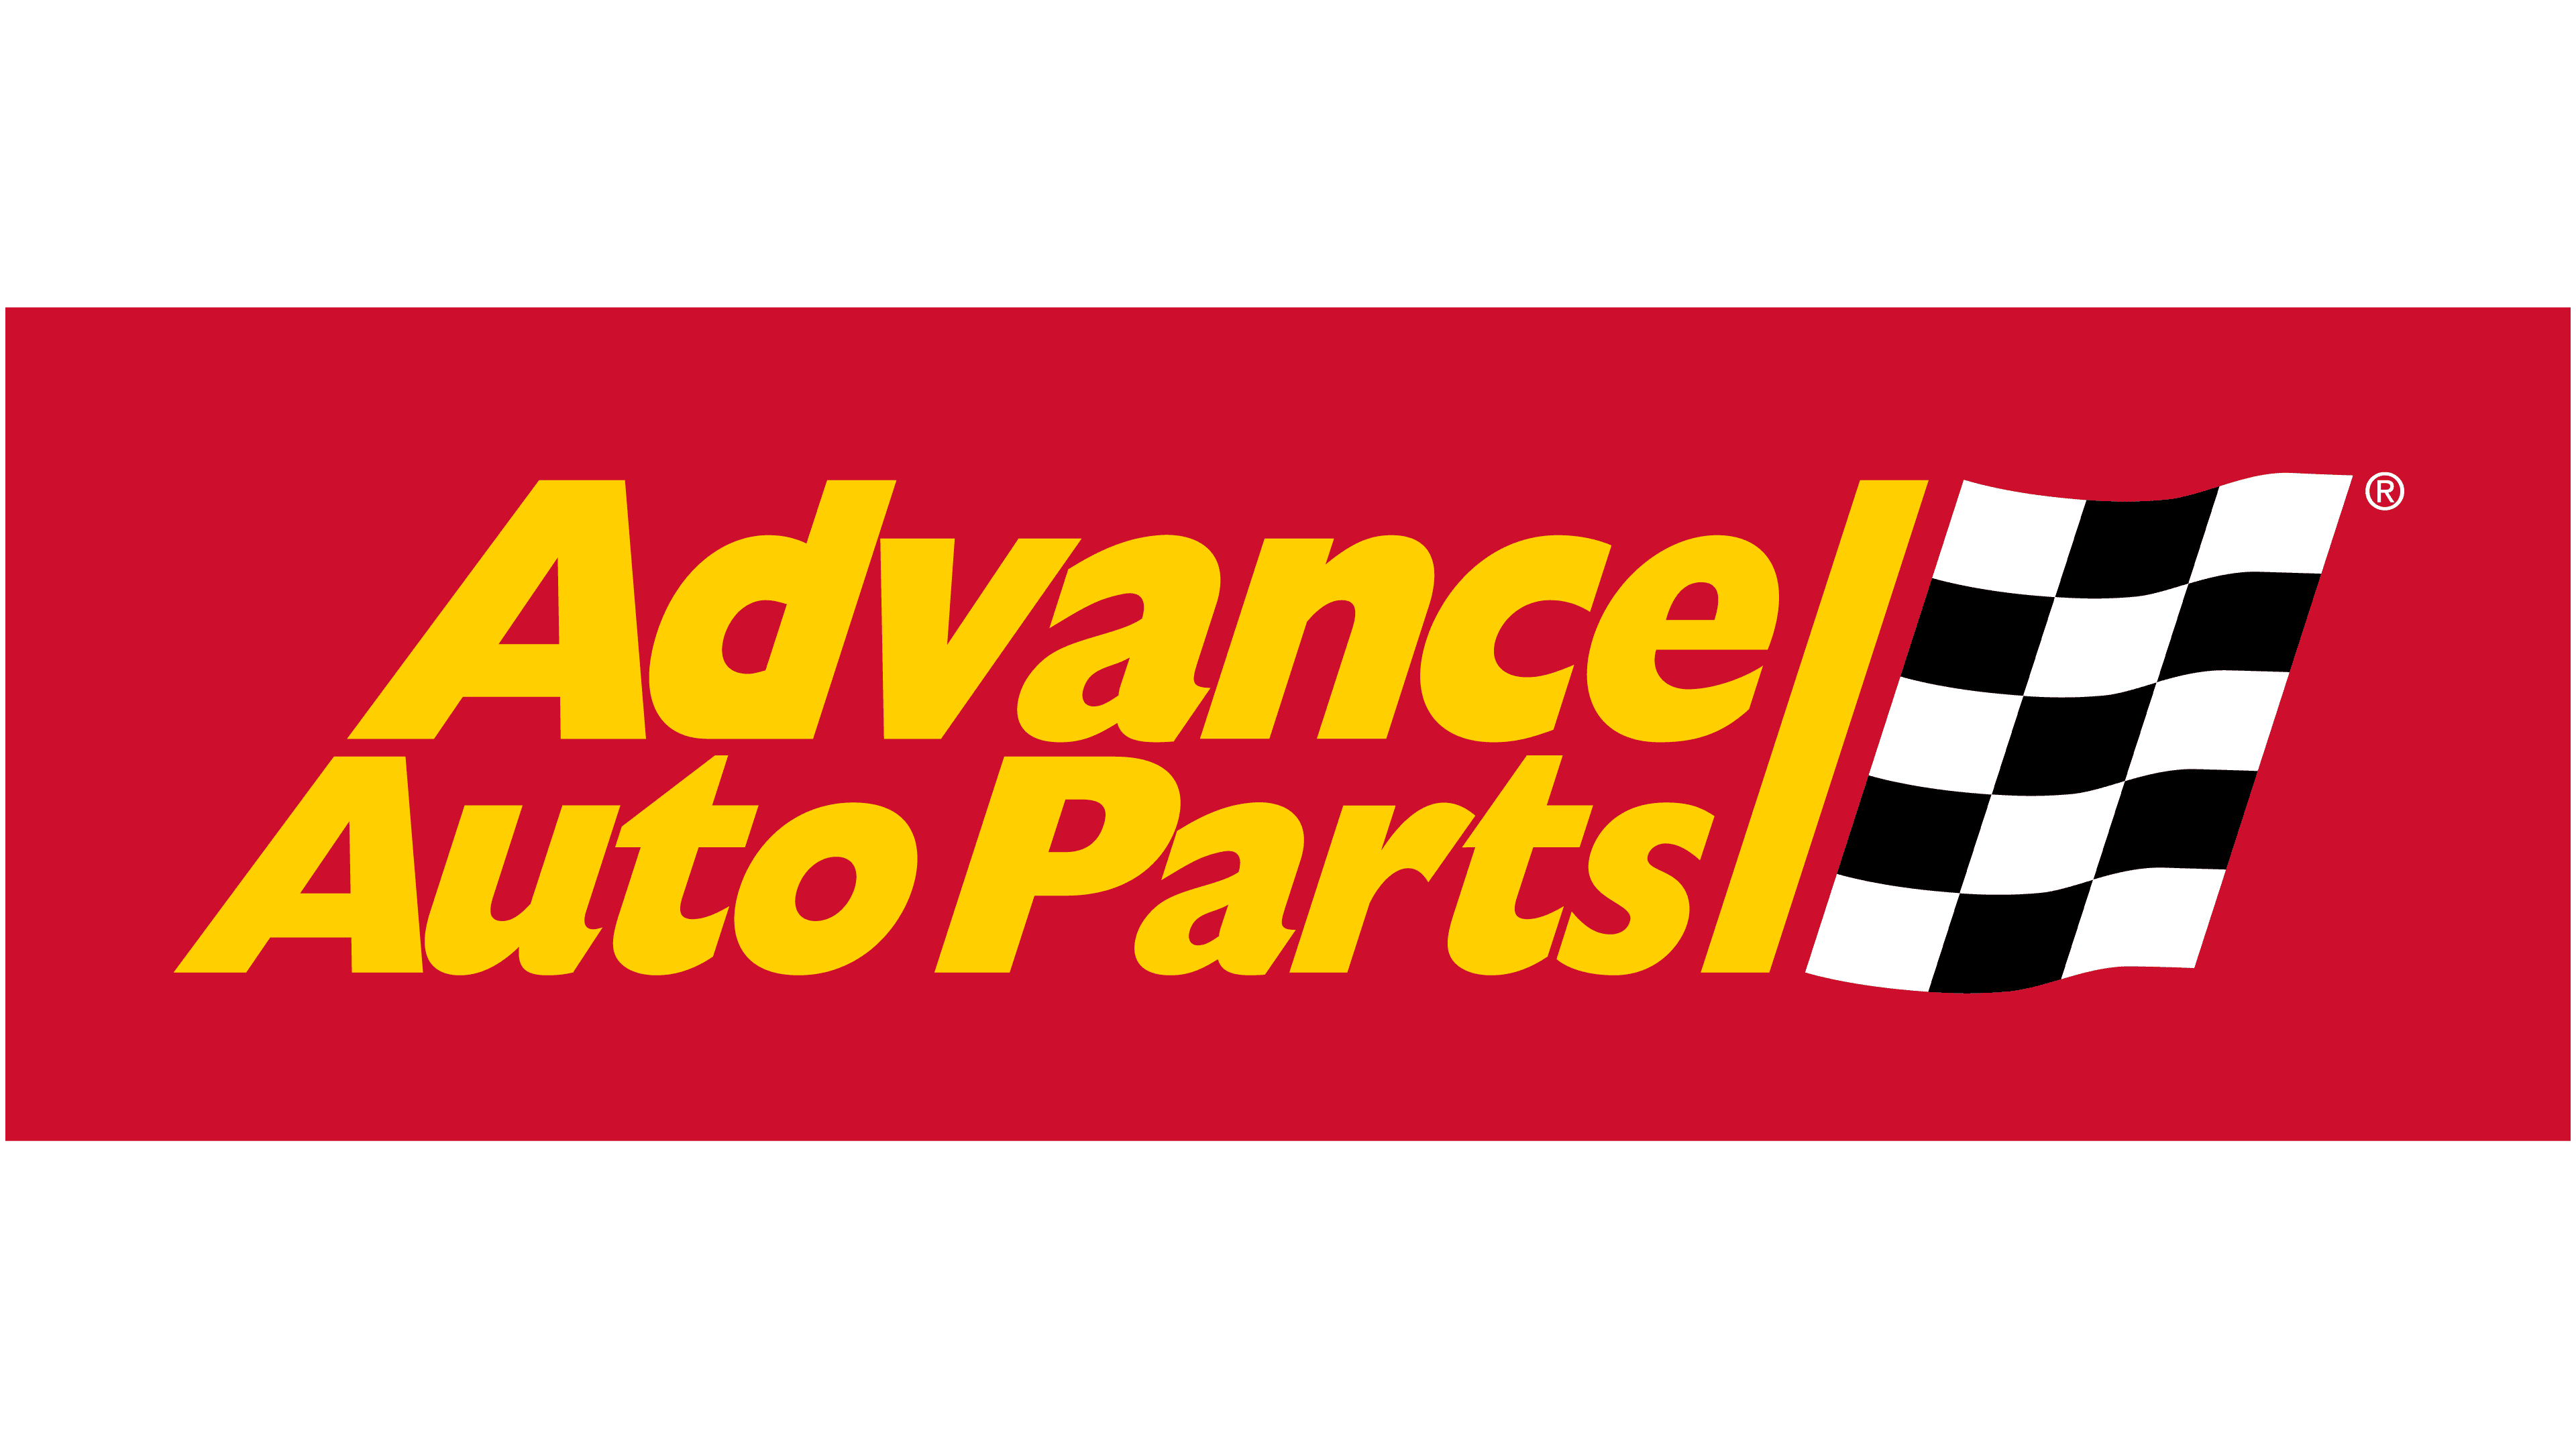 Graphene Integrations Sells in Advanced Auto Parts